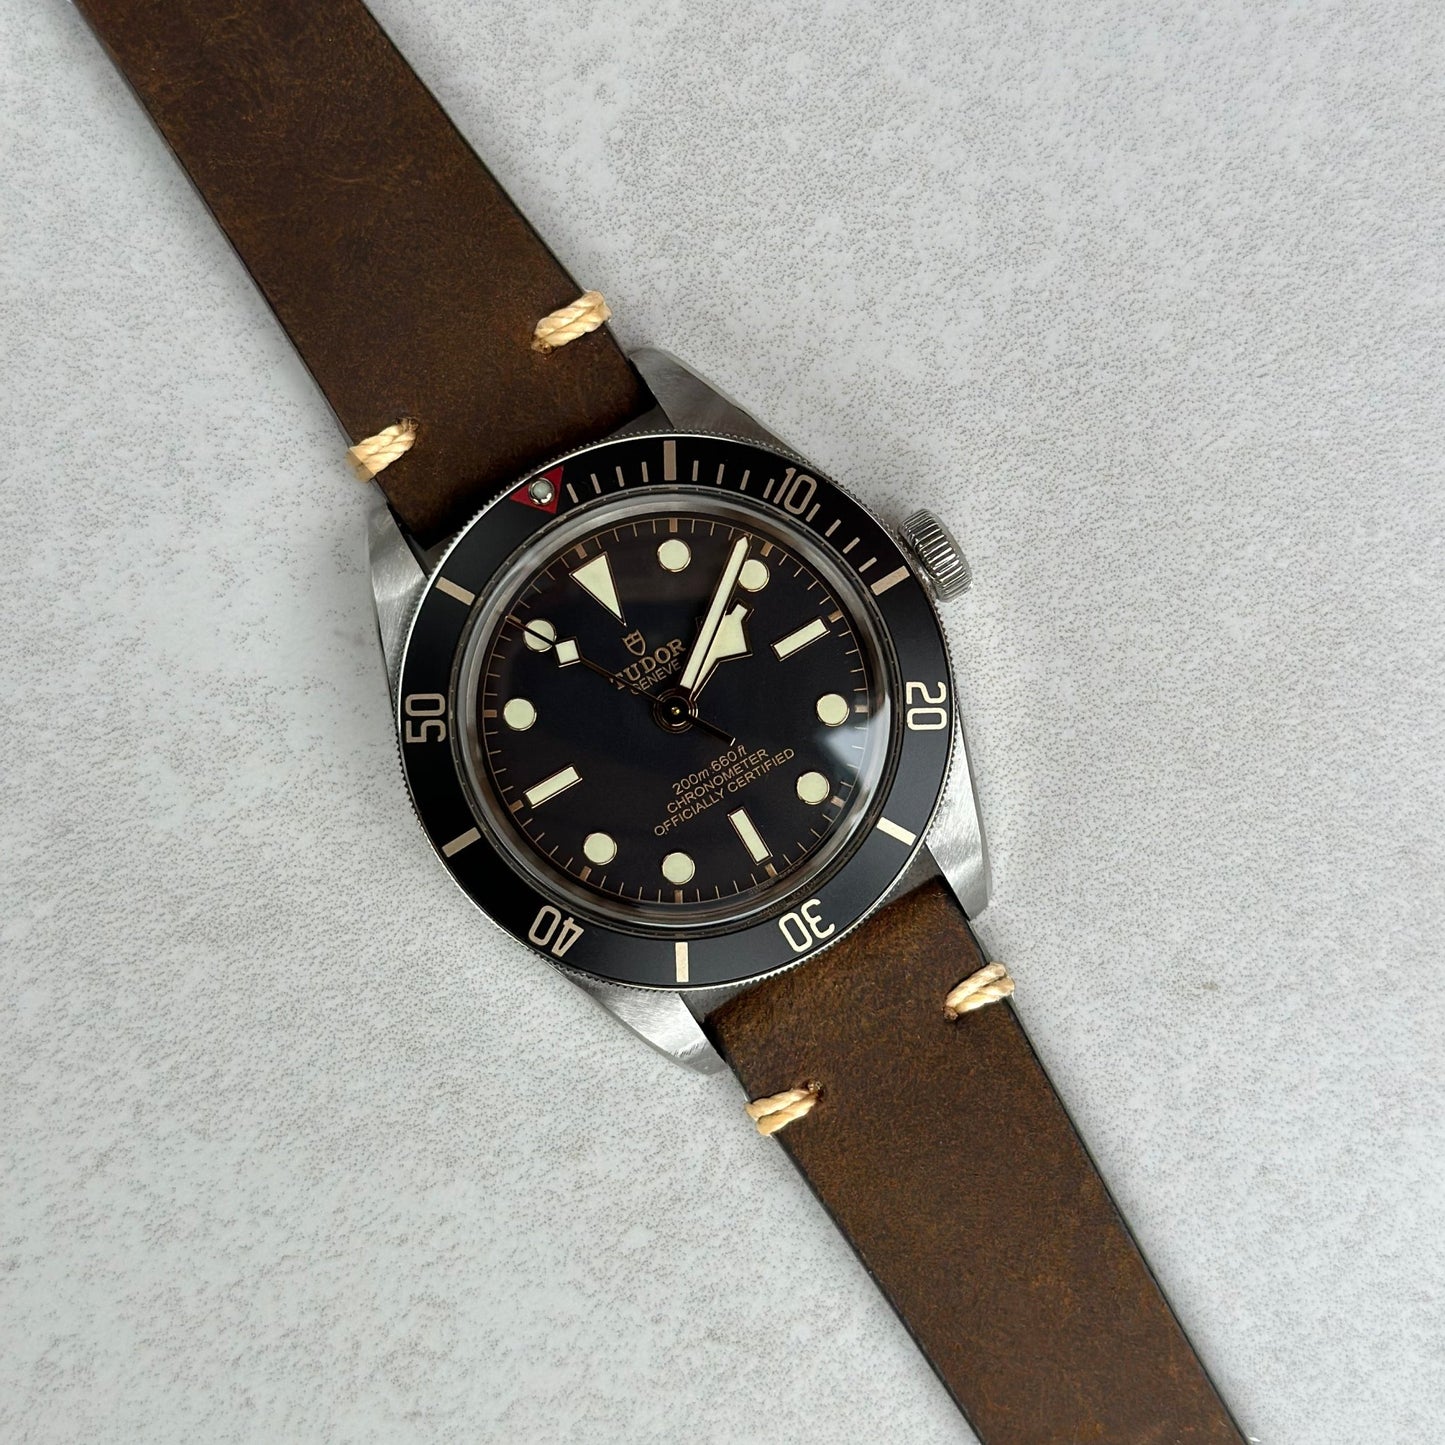 Chocolate brown full grain leather watch strap on the Tudor Blackbay 58. Contrast ivory stitching. Watch And Strap.